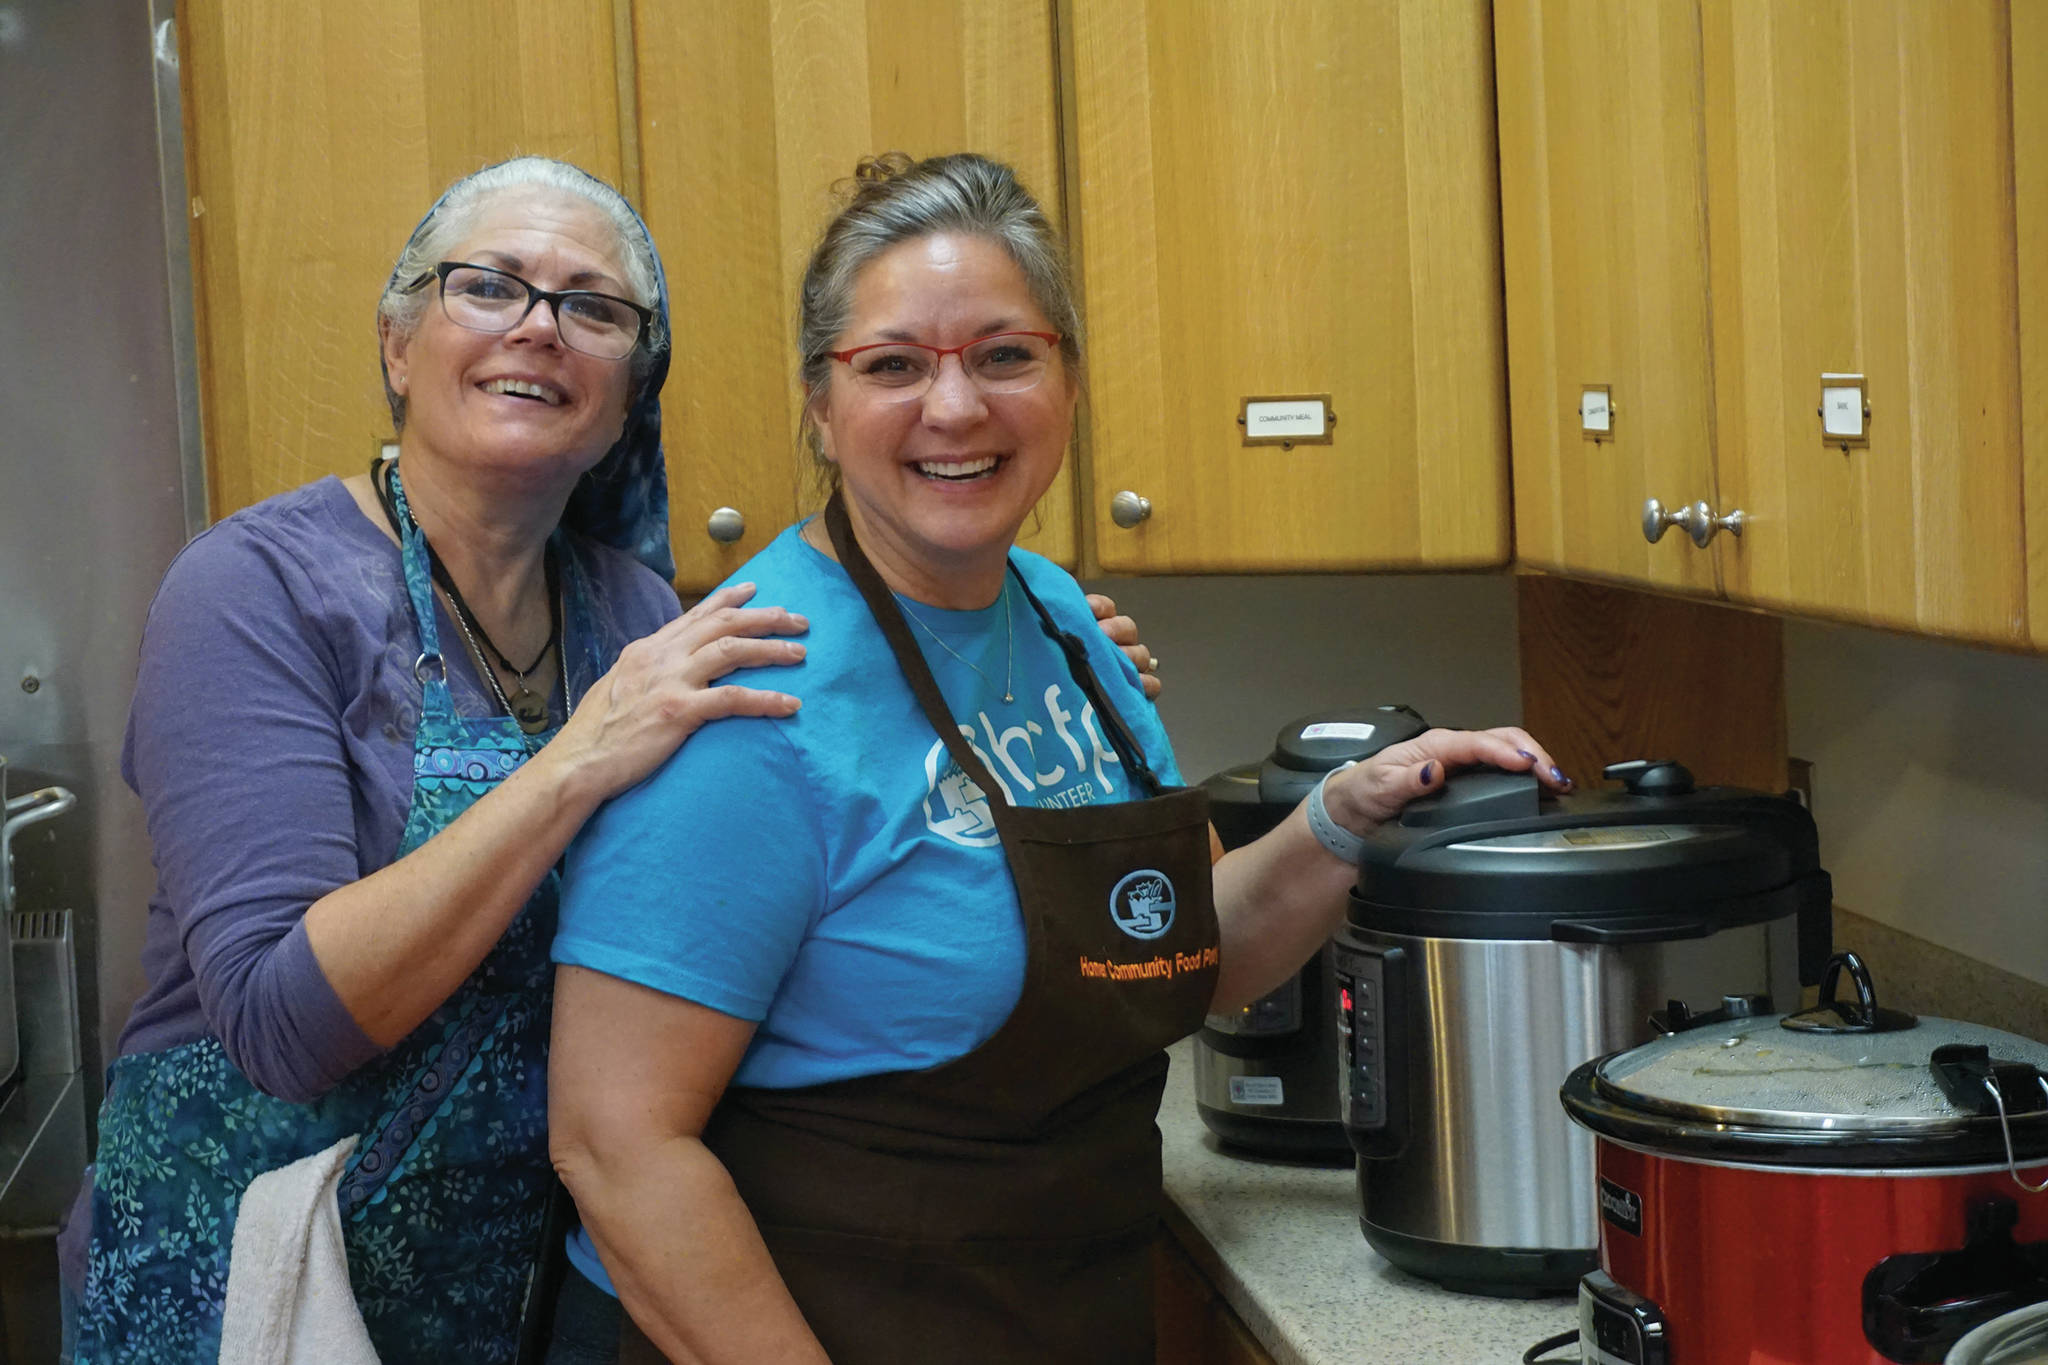 Susan Pacillo, left, and Cinda Martin, right, warm up soup at the annual Homer Community Food Pantry’s Empty Bowls fundraiser on Friday, Nov. 8, 2019, at Homer United Methodist Church in Homer, Alaska. (Photo by Michael Armstrong/Homer News)